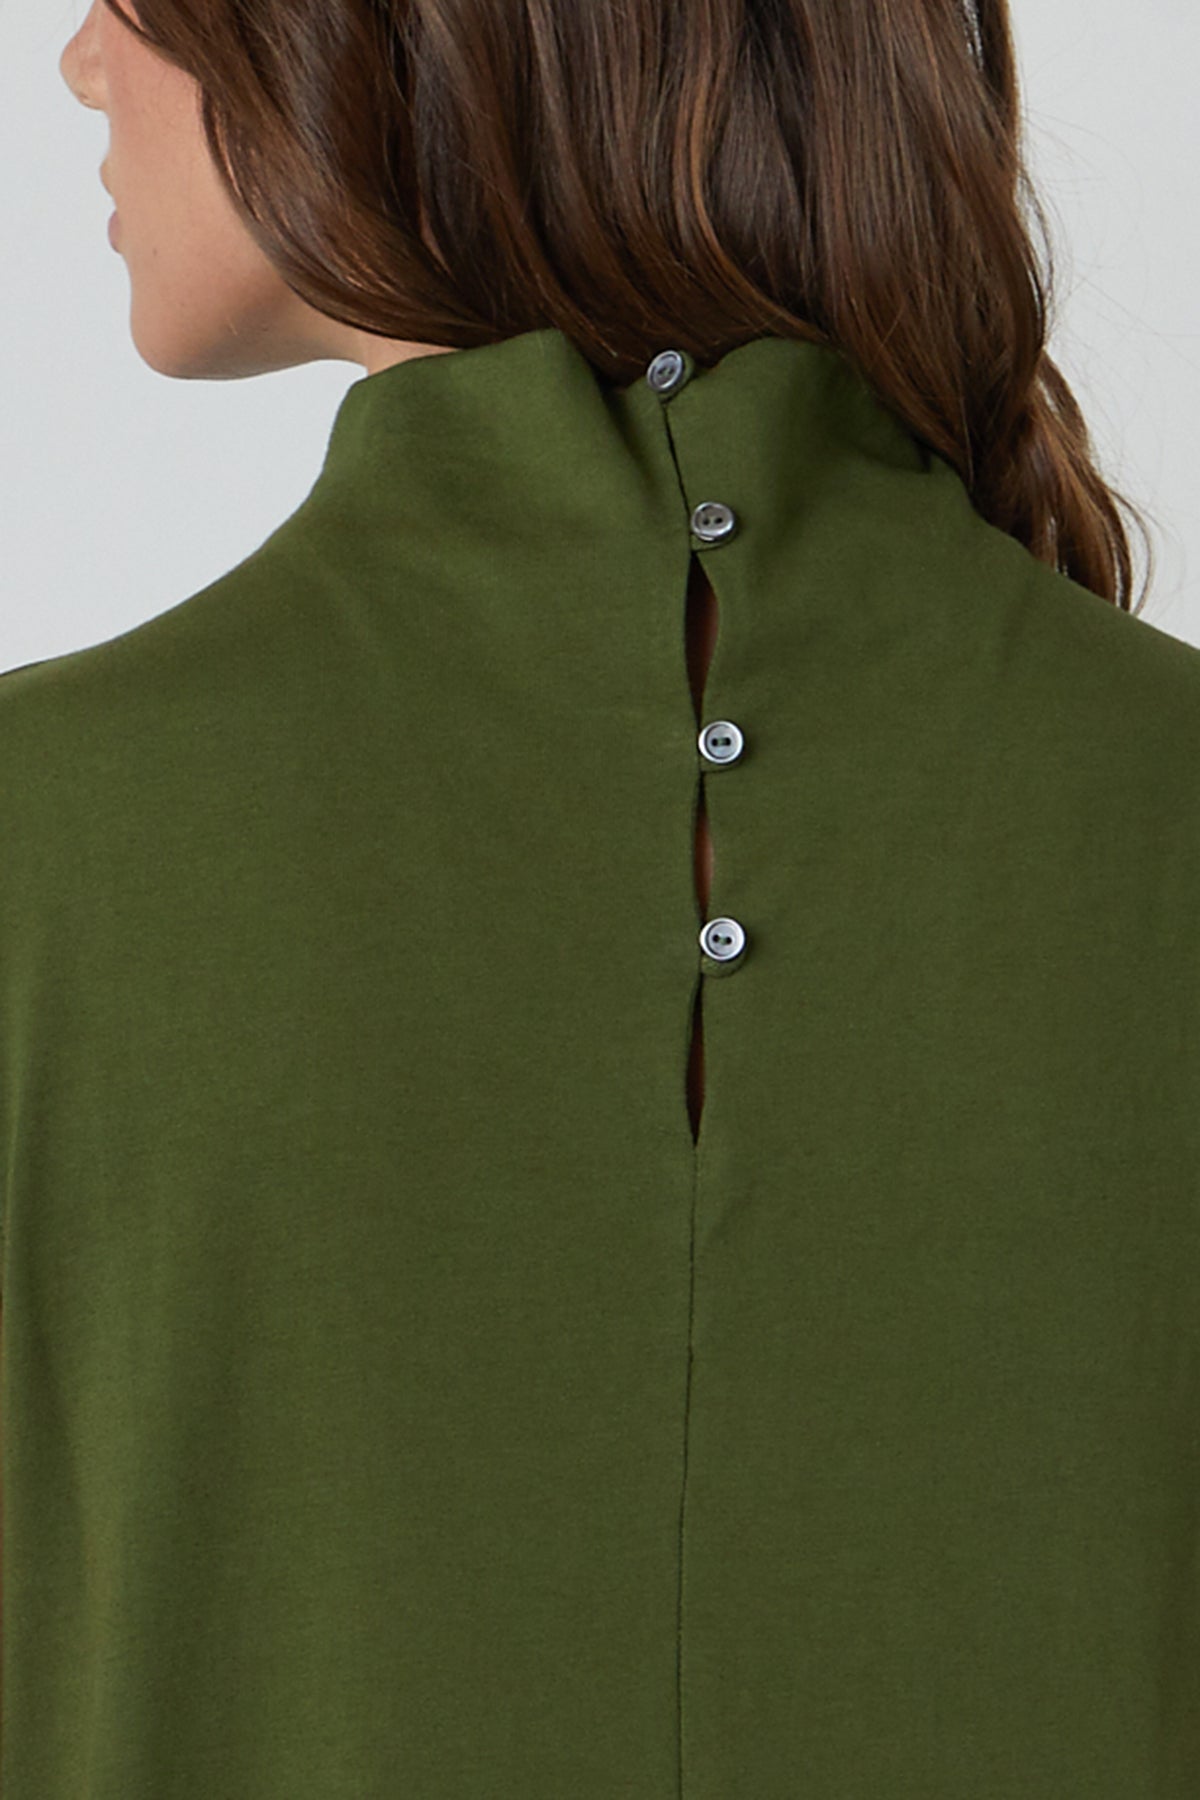   Hydie Mock Neck Dress Structured Cotton in Evergreen back button detail view 